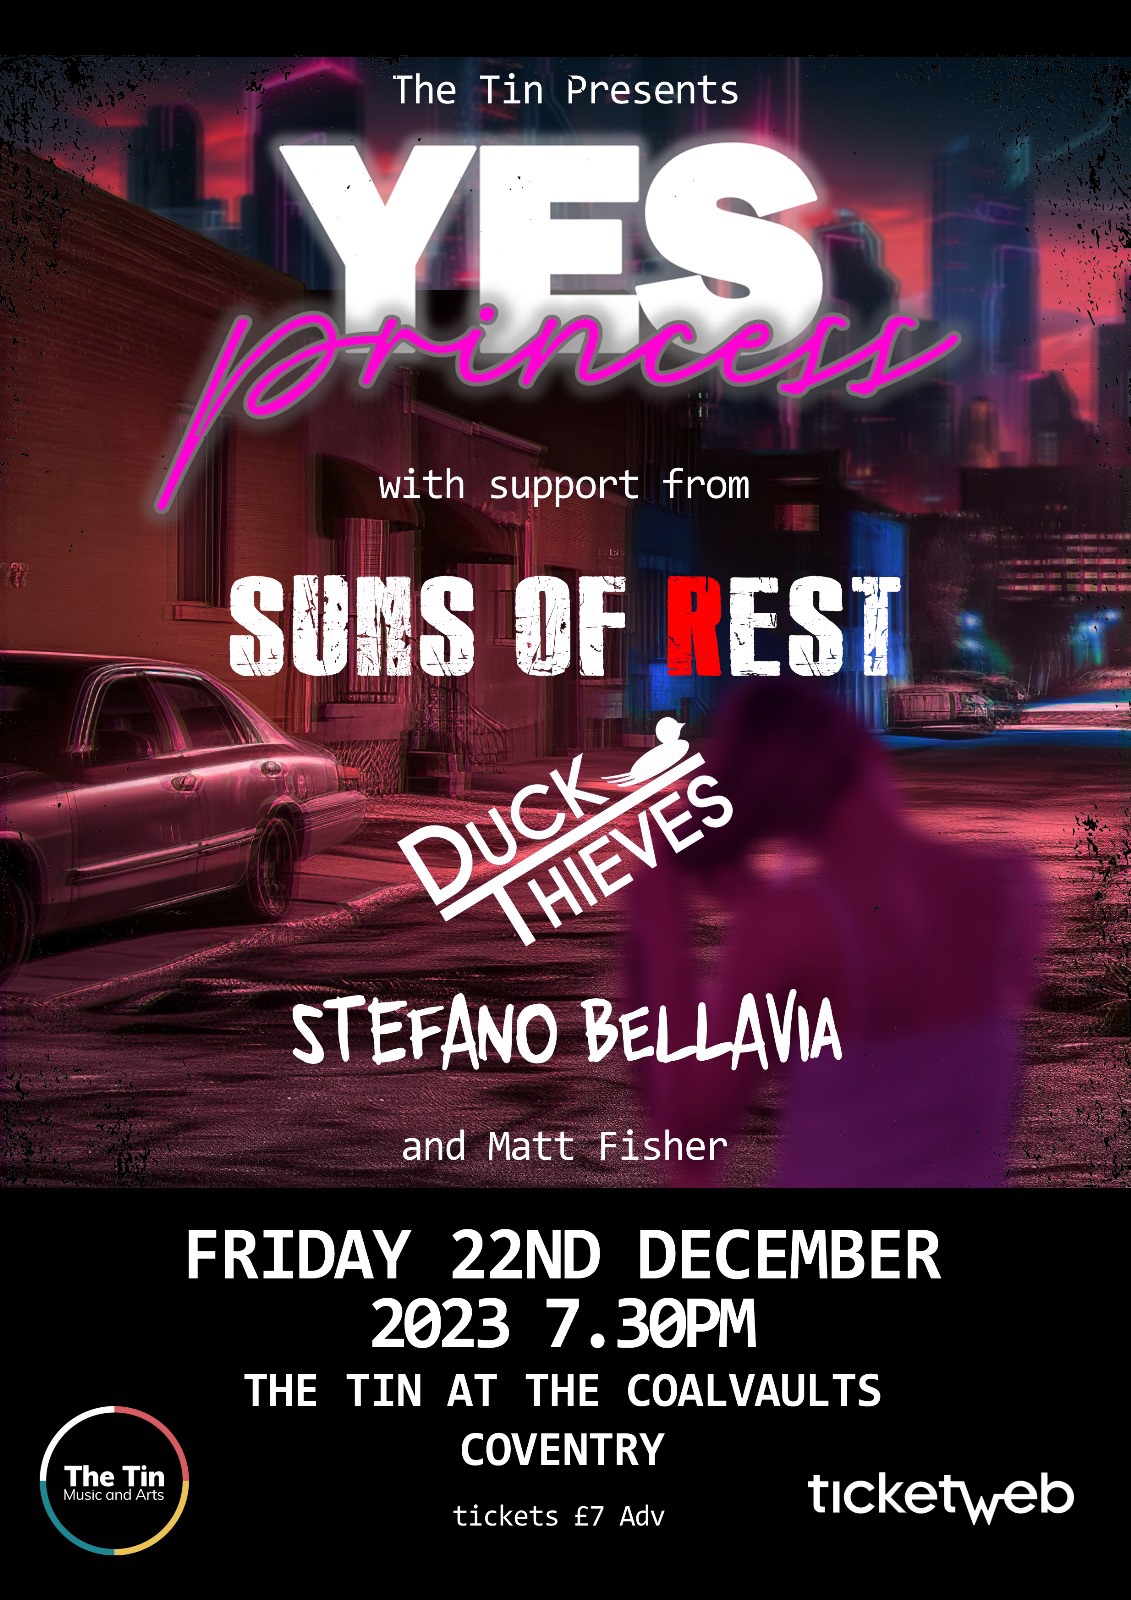 Poster for Yes Princess at The Tin at the Coal Vaults on Friday 22nd December. Support acts include Suns of Rest, Duck Thieves, Stefano Bellavia and Matt Fisher. Tickets are £7 in advance, doors are at 7.30pm